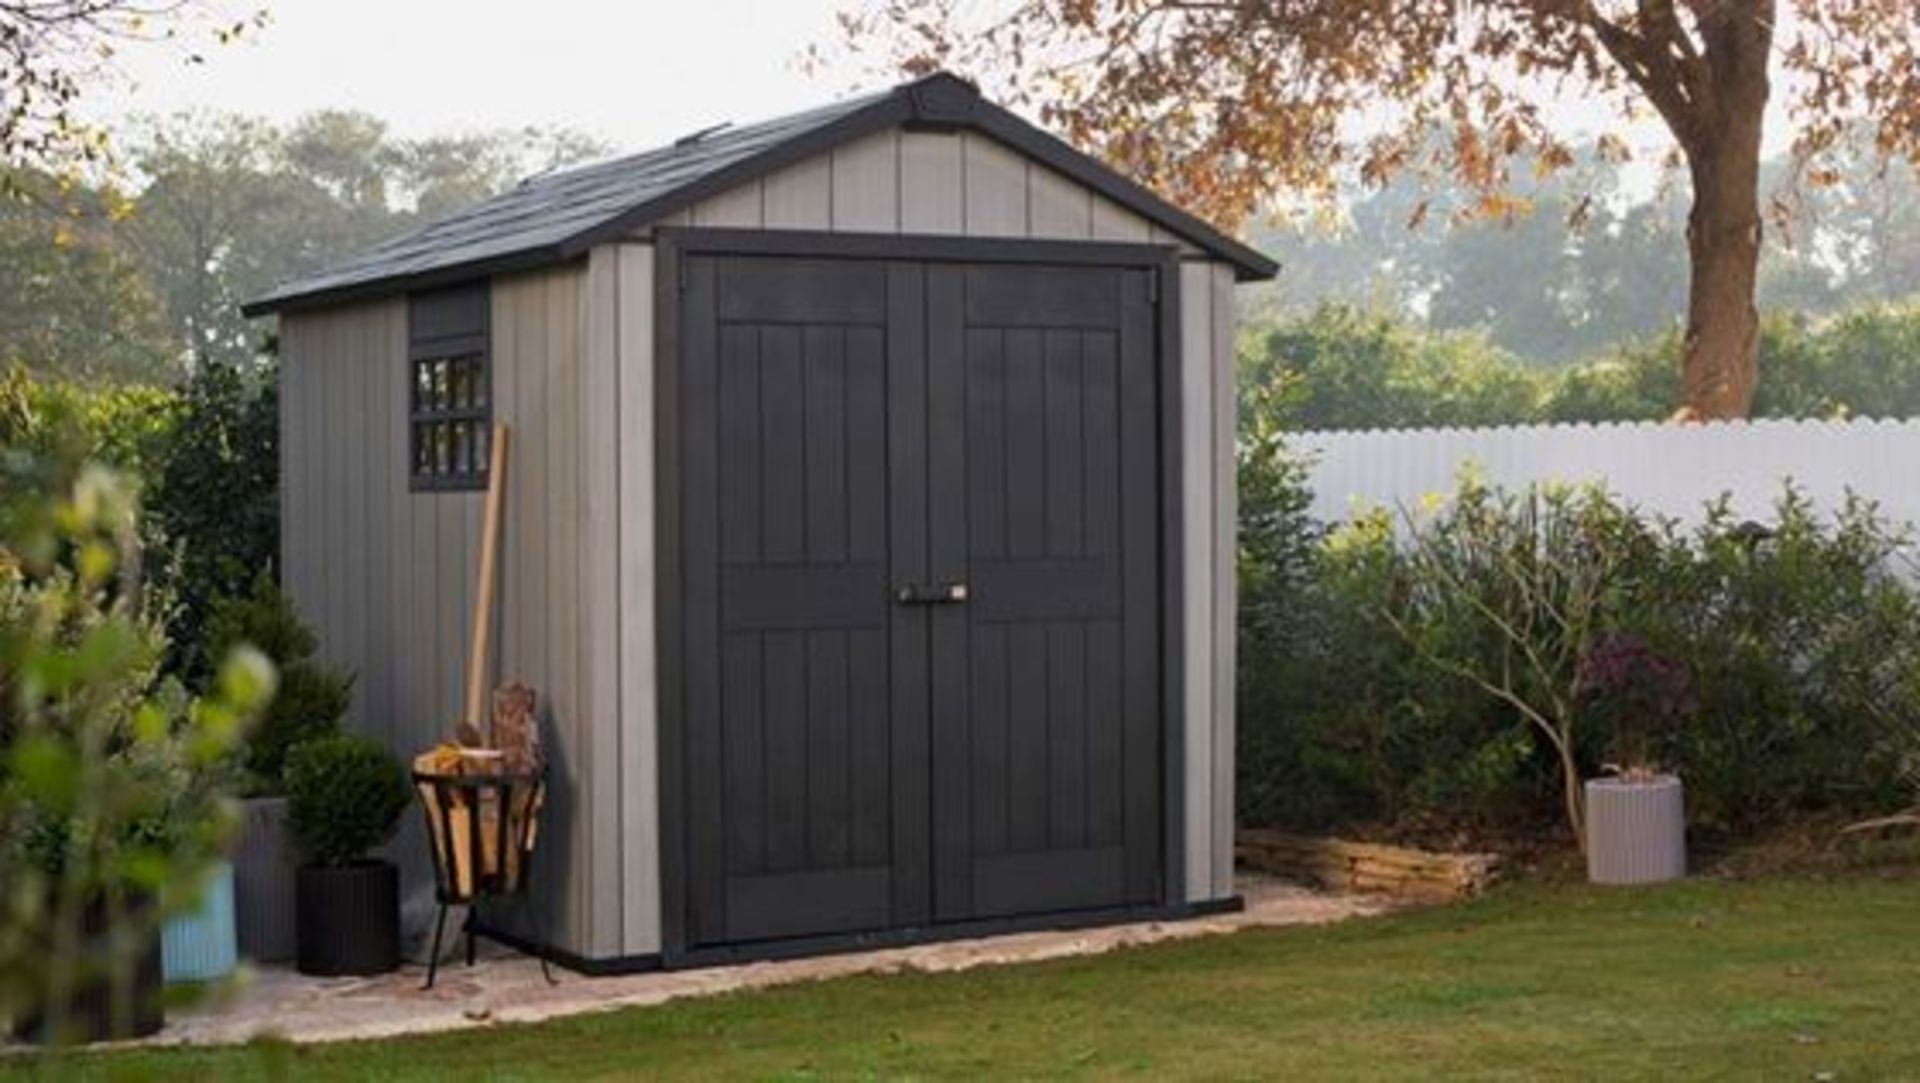 As new and boxed Keter Oakland 759 shed Worry-free thanks to its ultra-rugged resin construction and